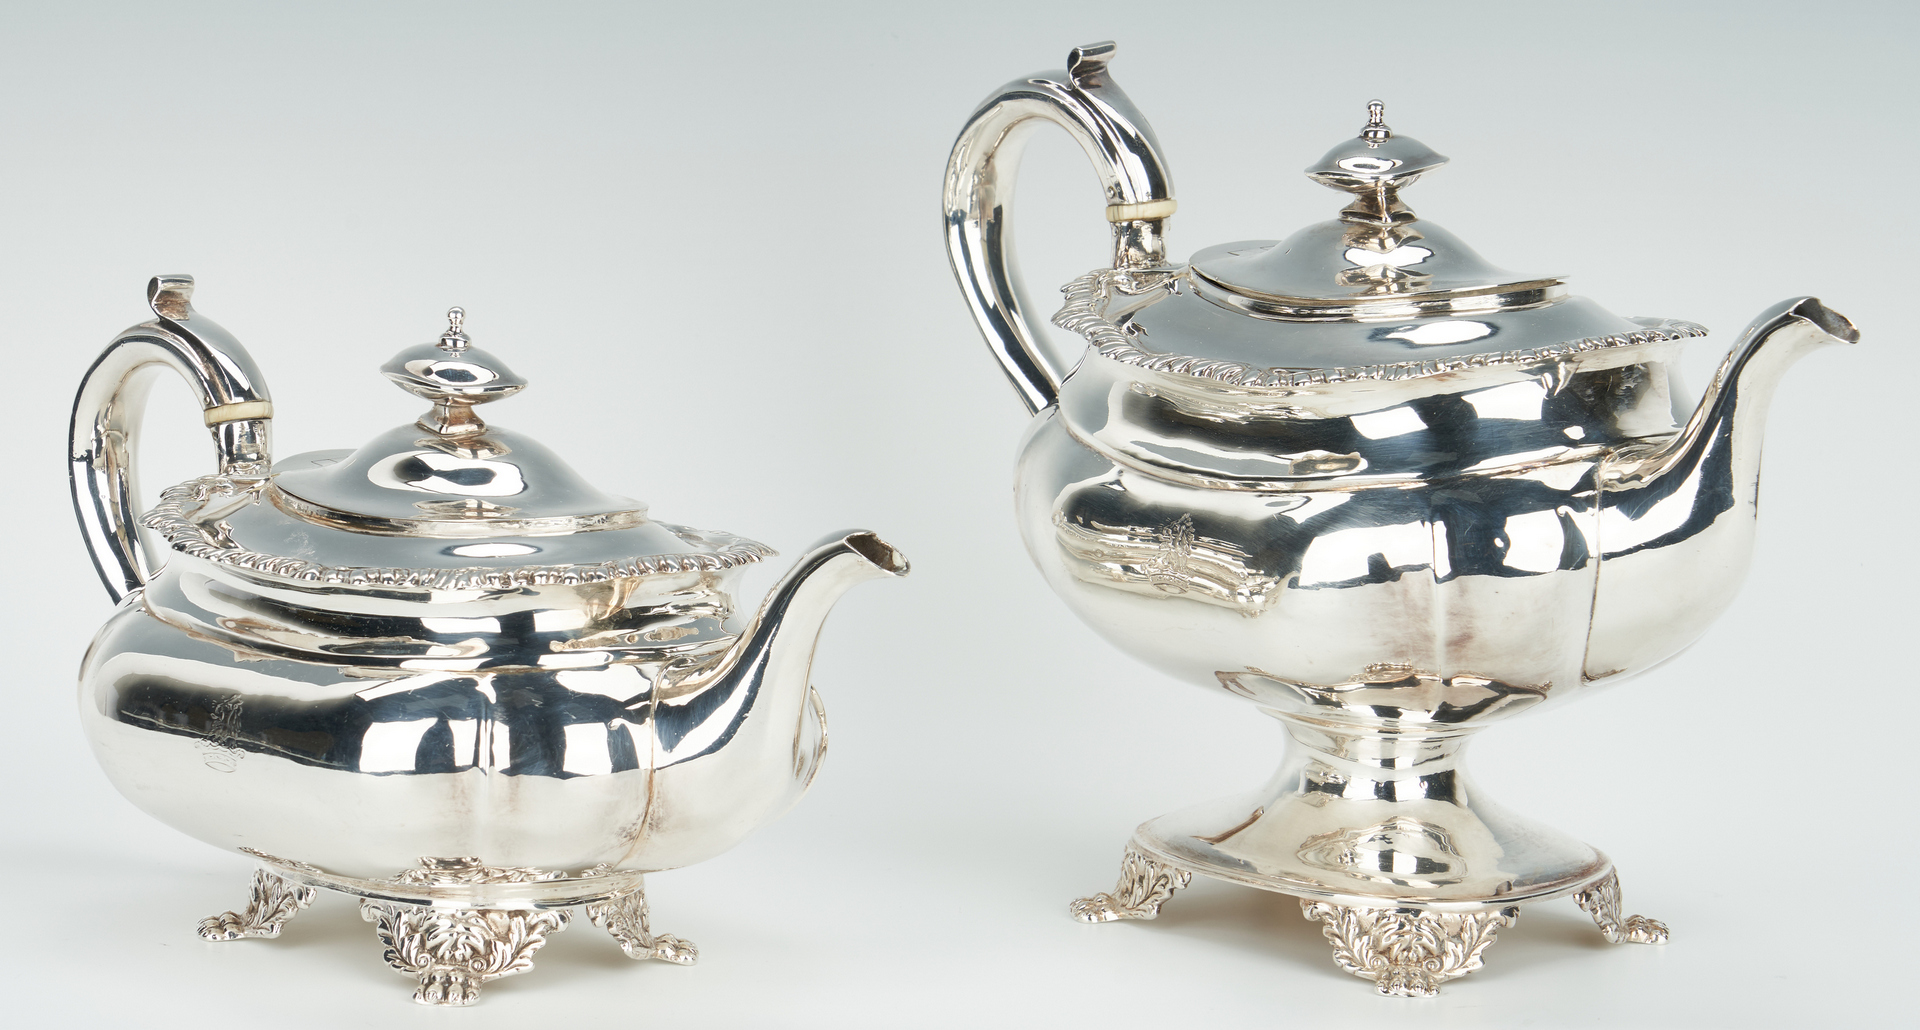 Lot 68: 4 Pc. English Sterling Tea Service + Old Sheffield Tray